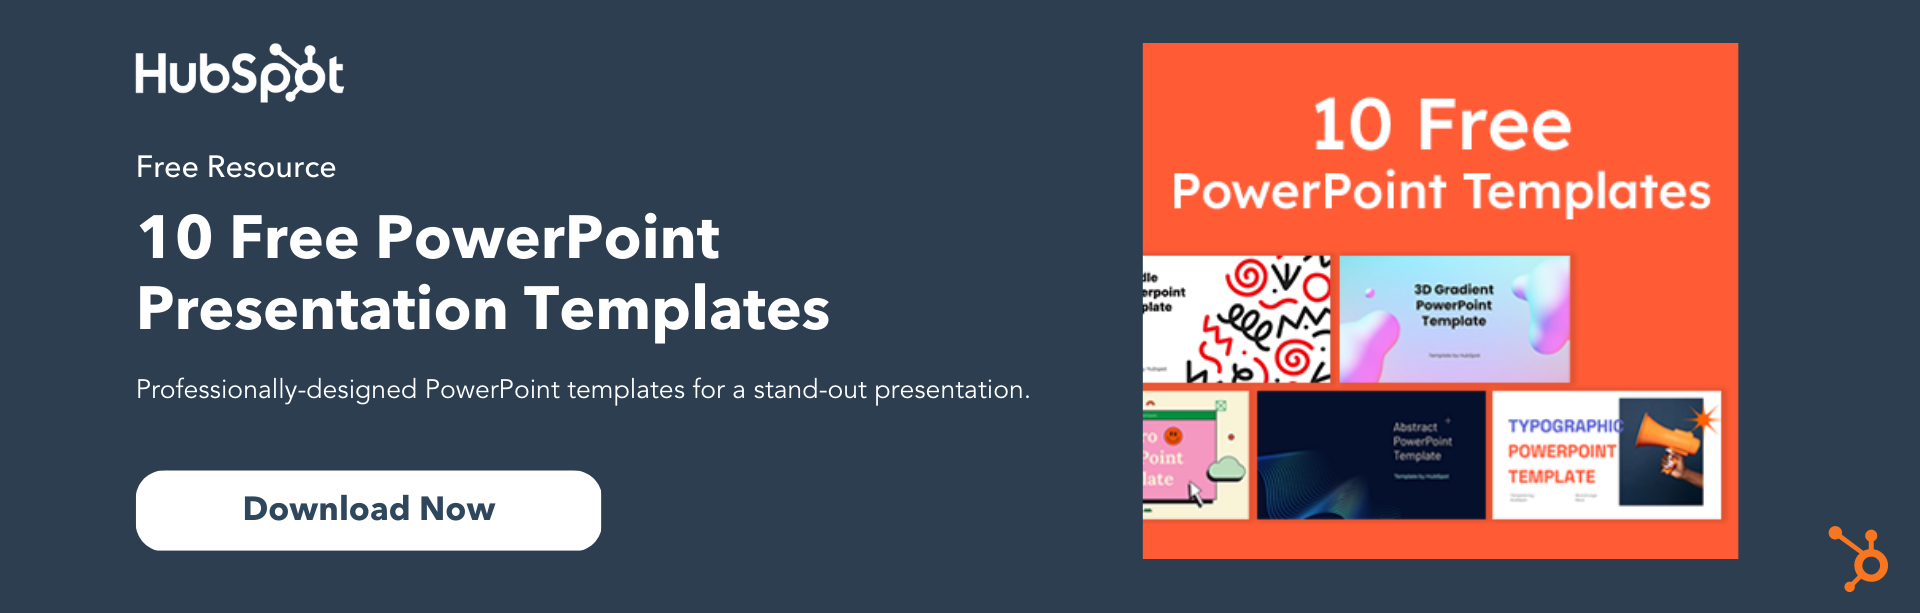 17 PowerPoint Presentation Tips to Make More Creative Slideshows [+  Templates]